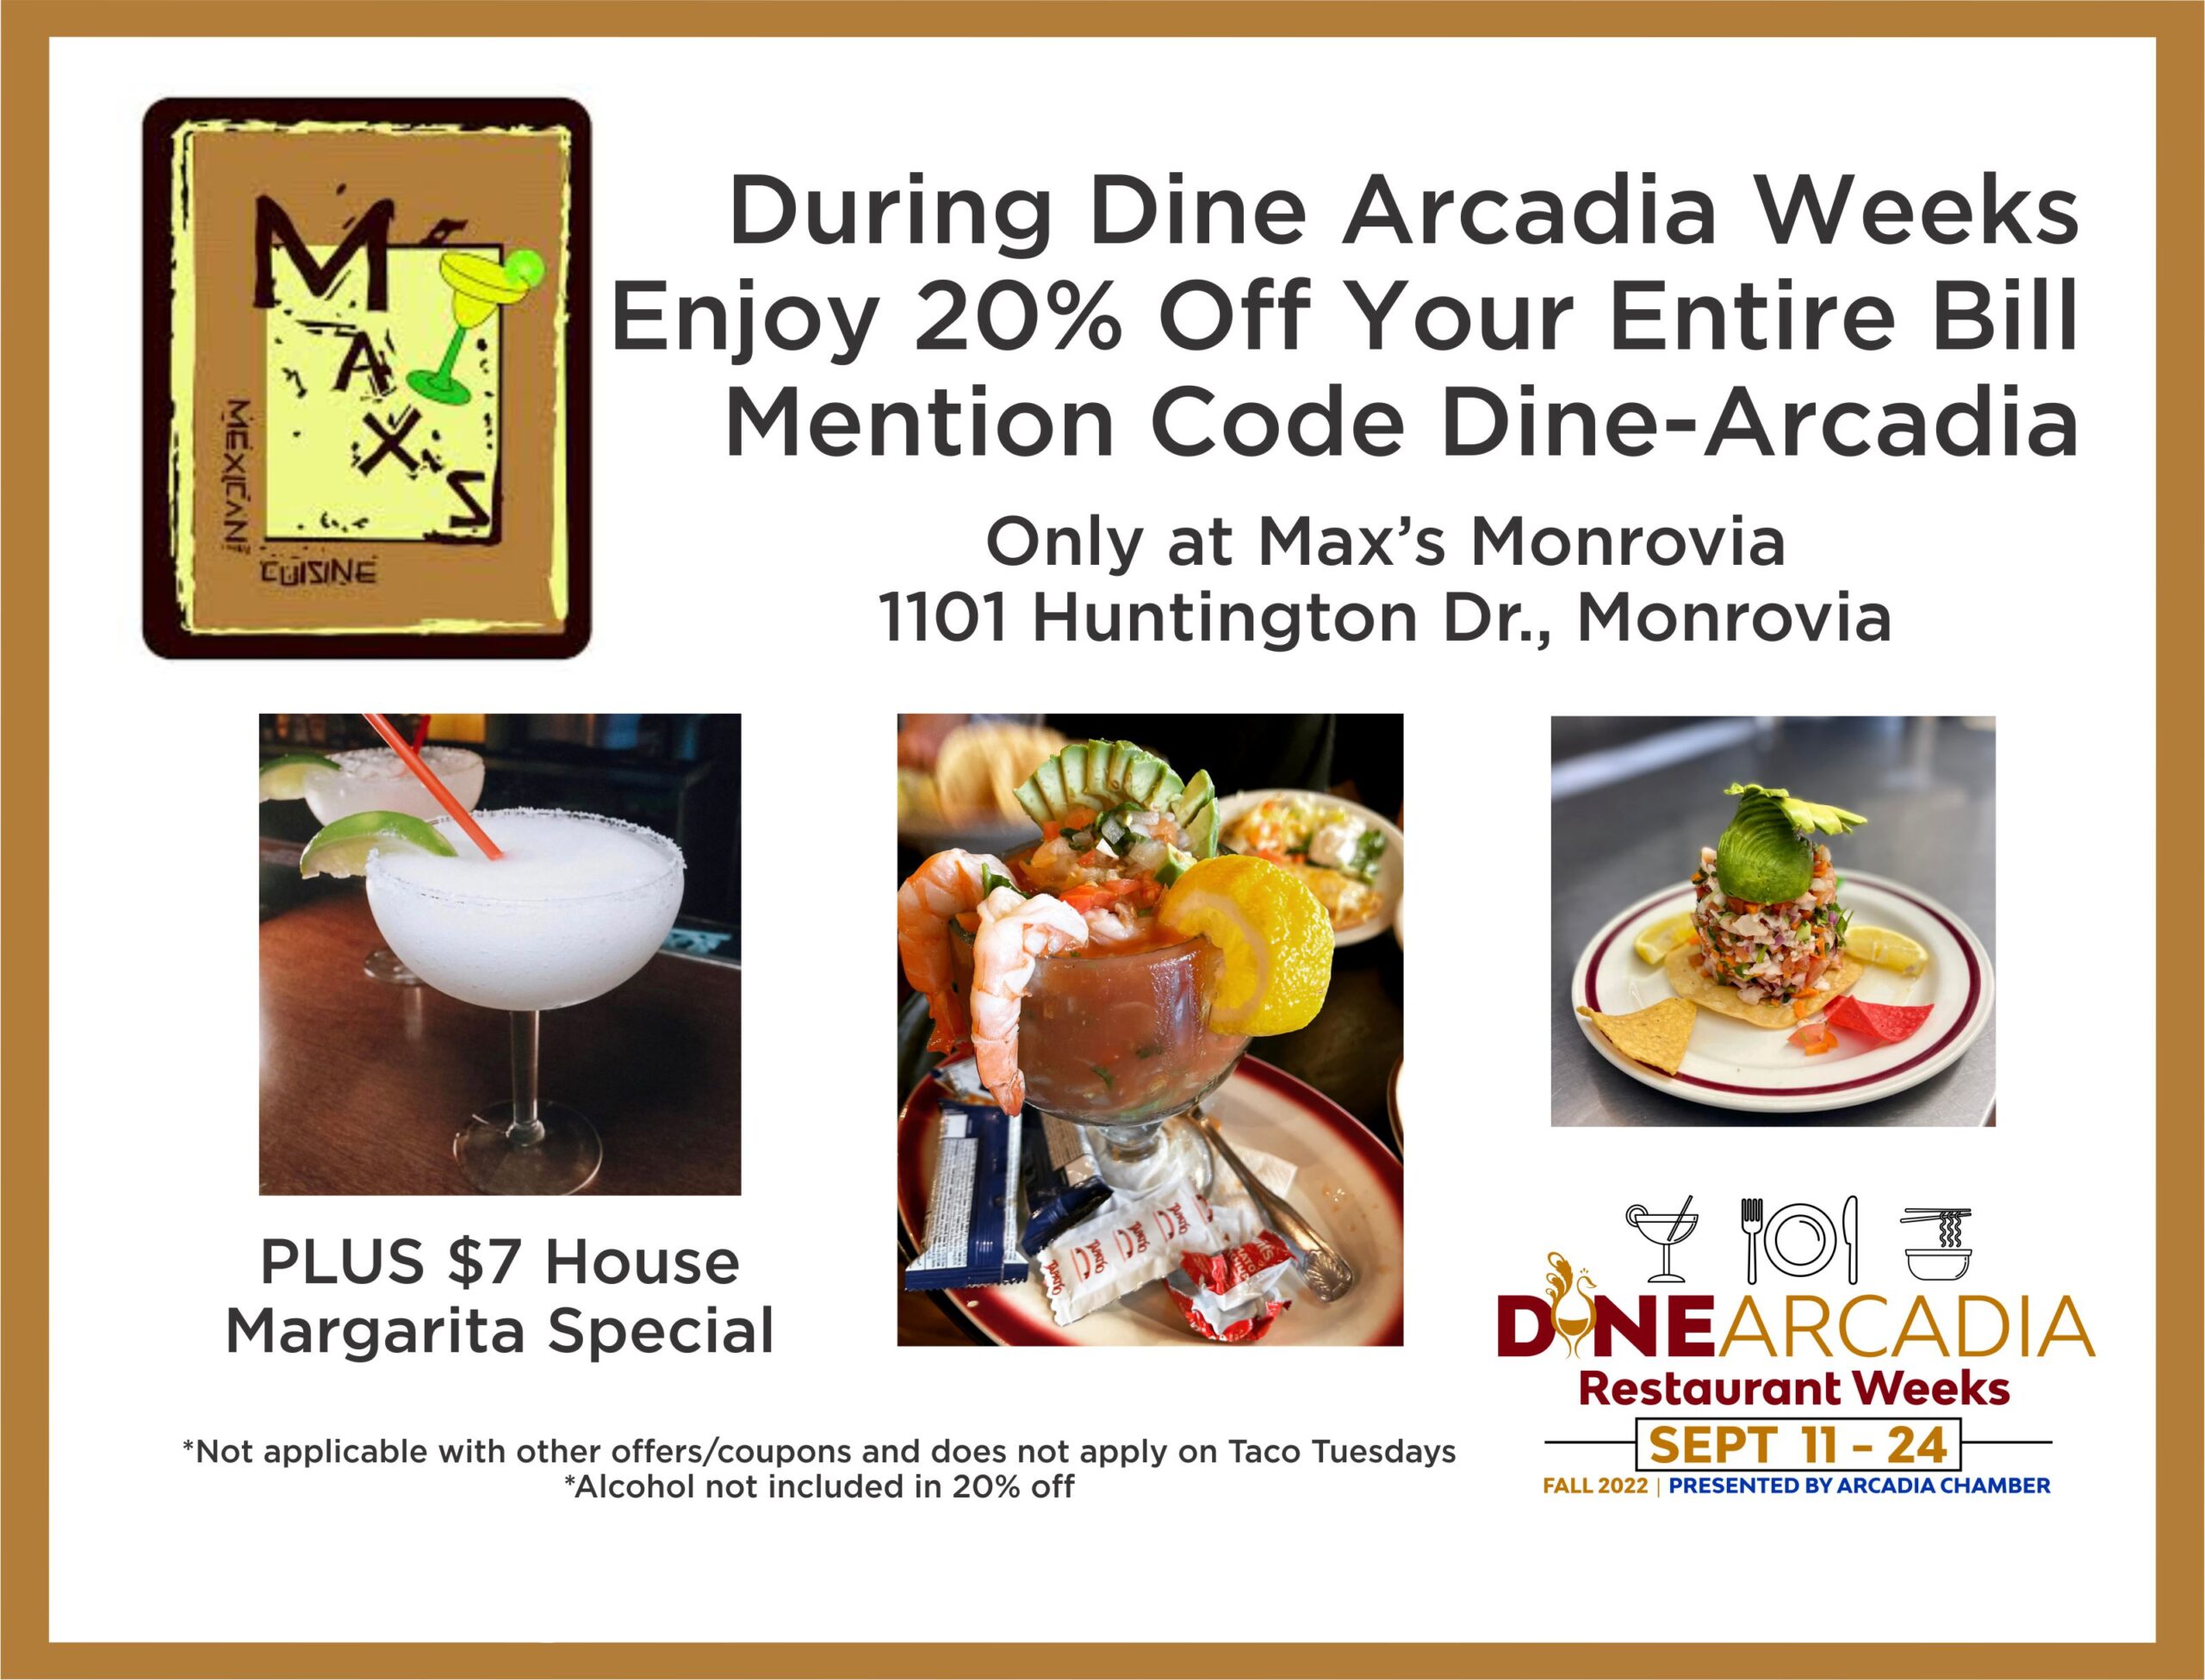 Max's Arcadia Dine Arcadia promo Sept 2022 showing images of food